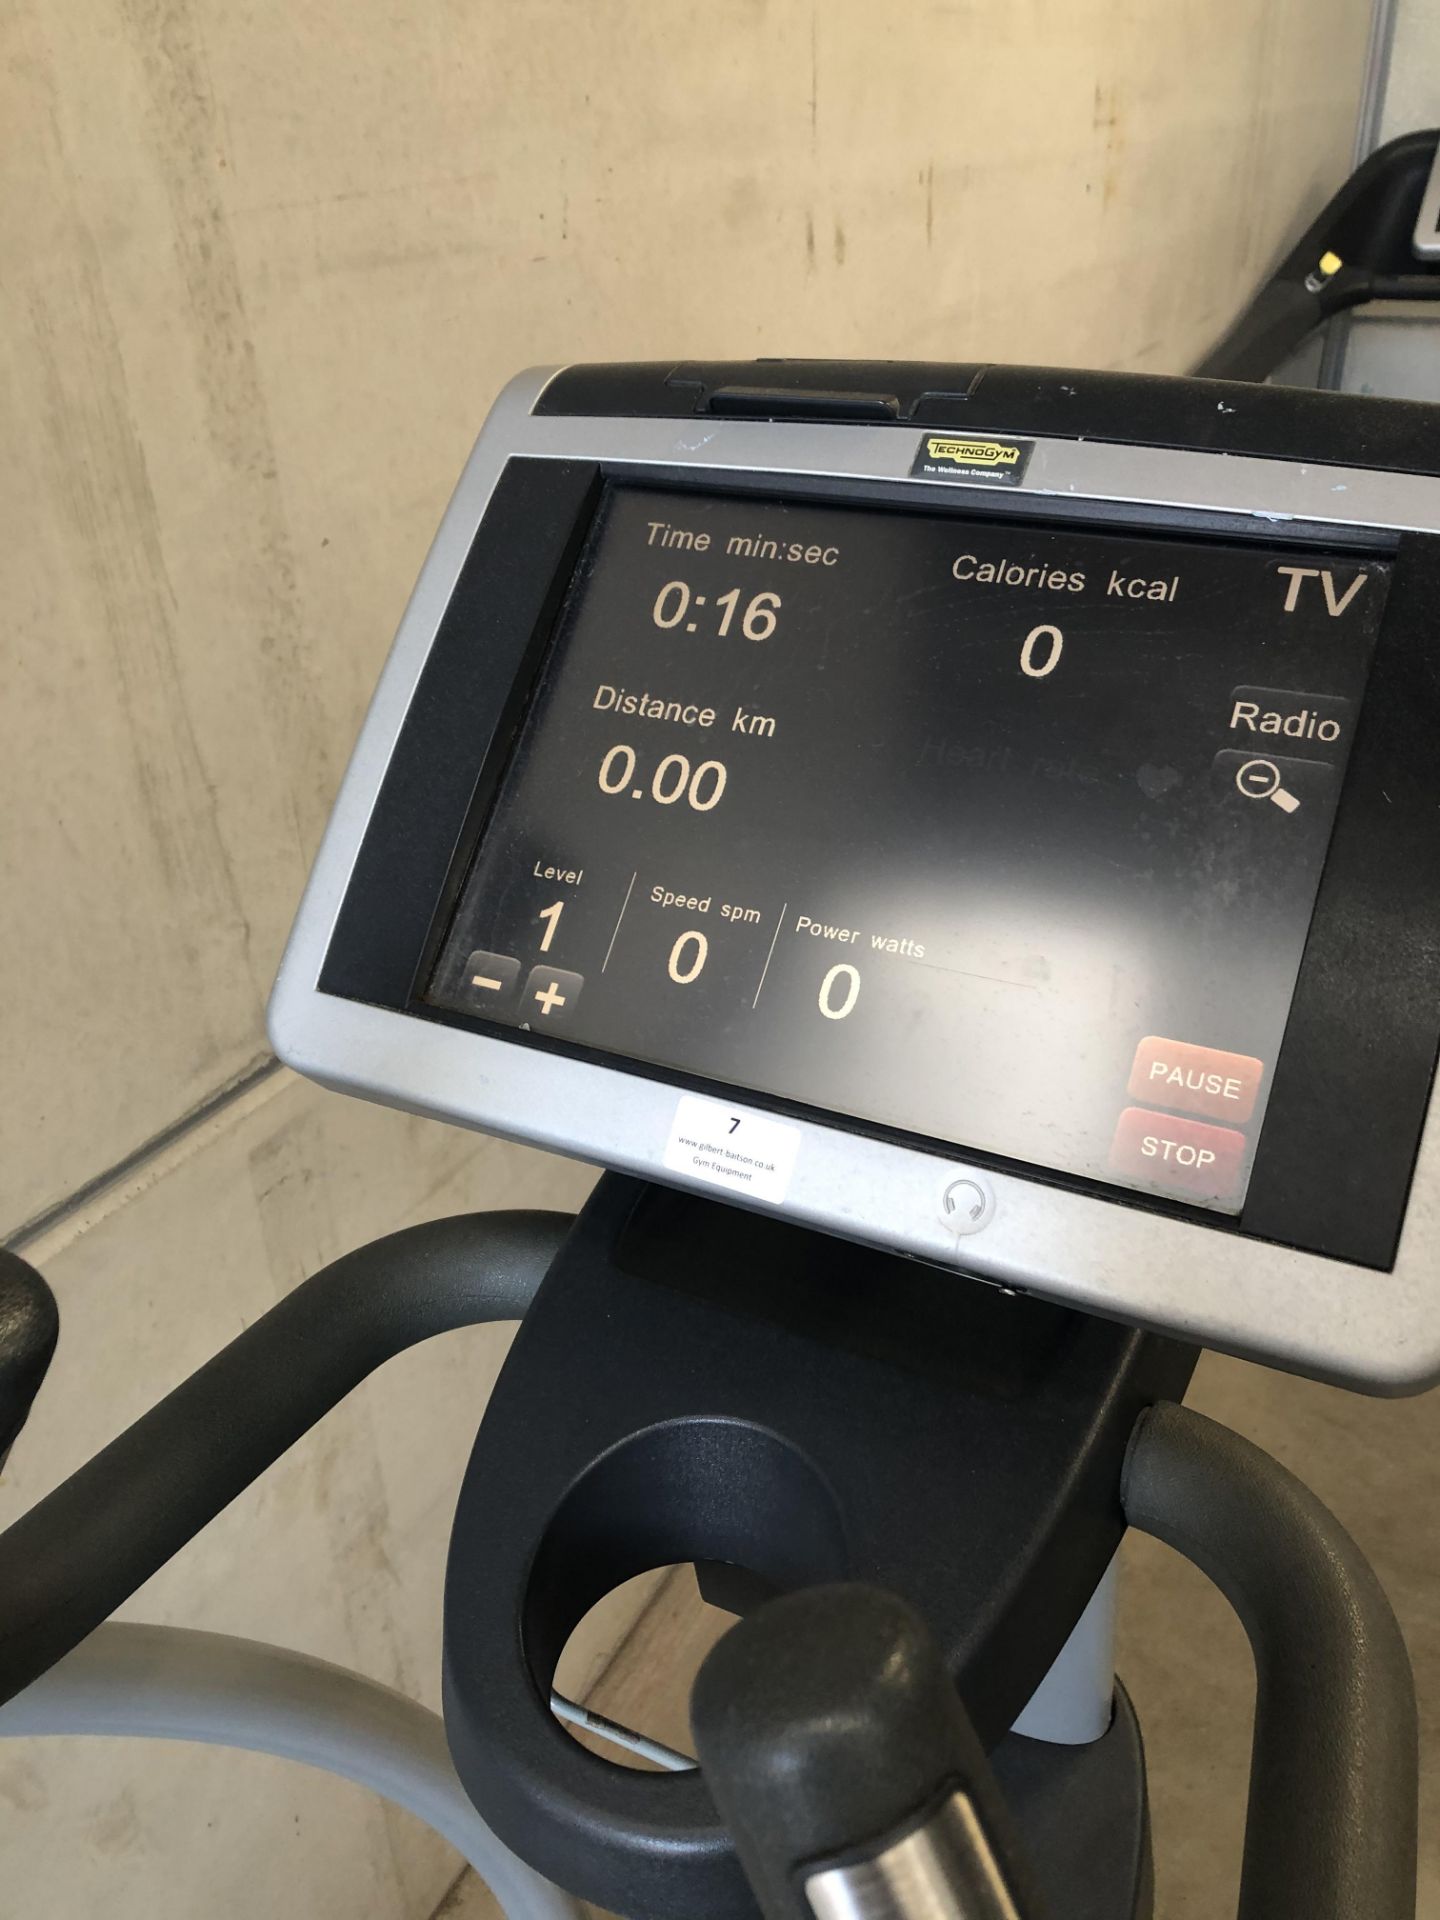 *Technogym 700 Series Synchro Excite Elliptical Cross Trainer with Touchscreen TV - Image 2 of 2